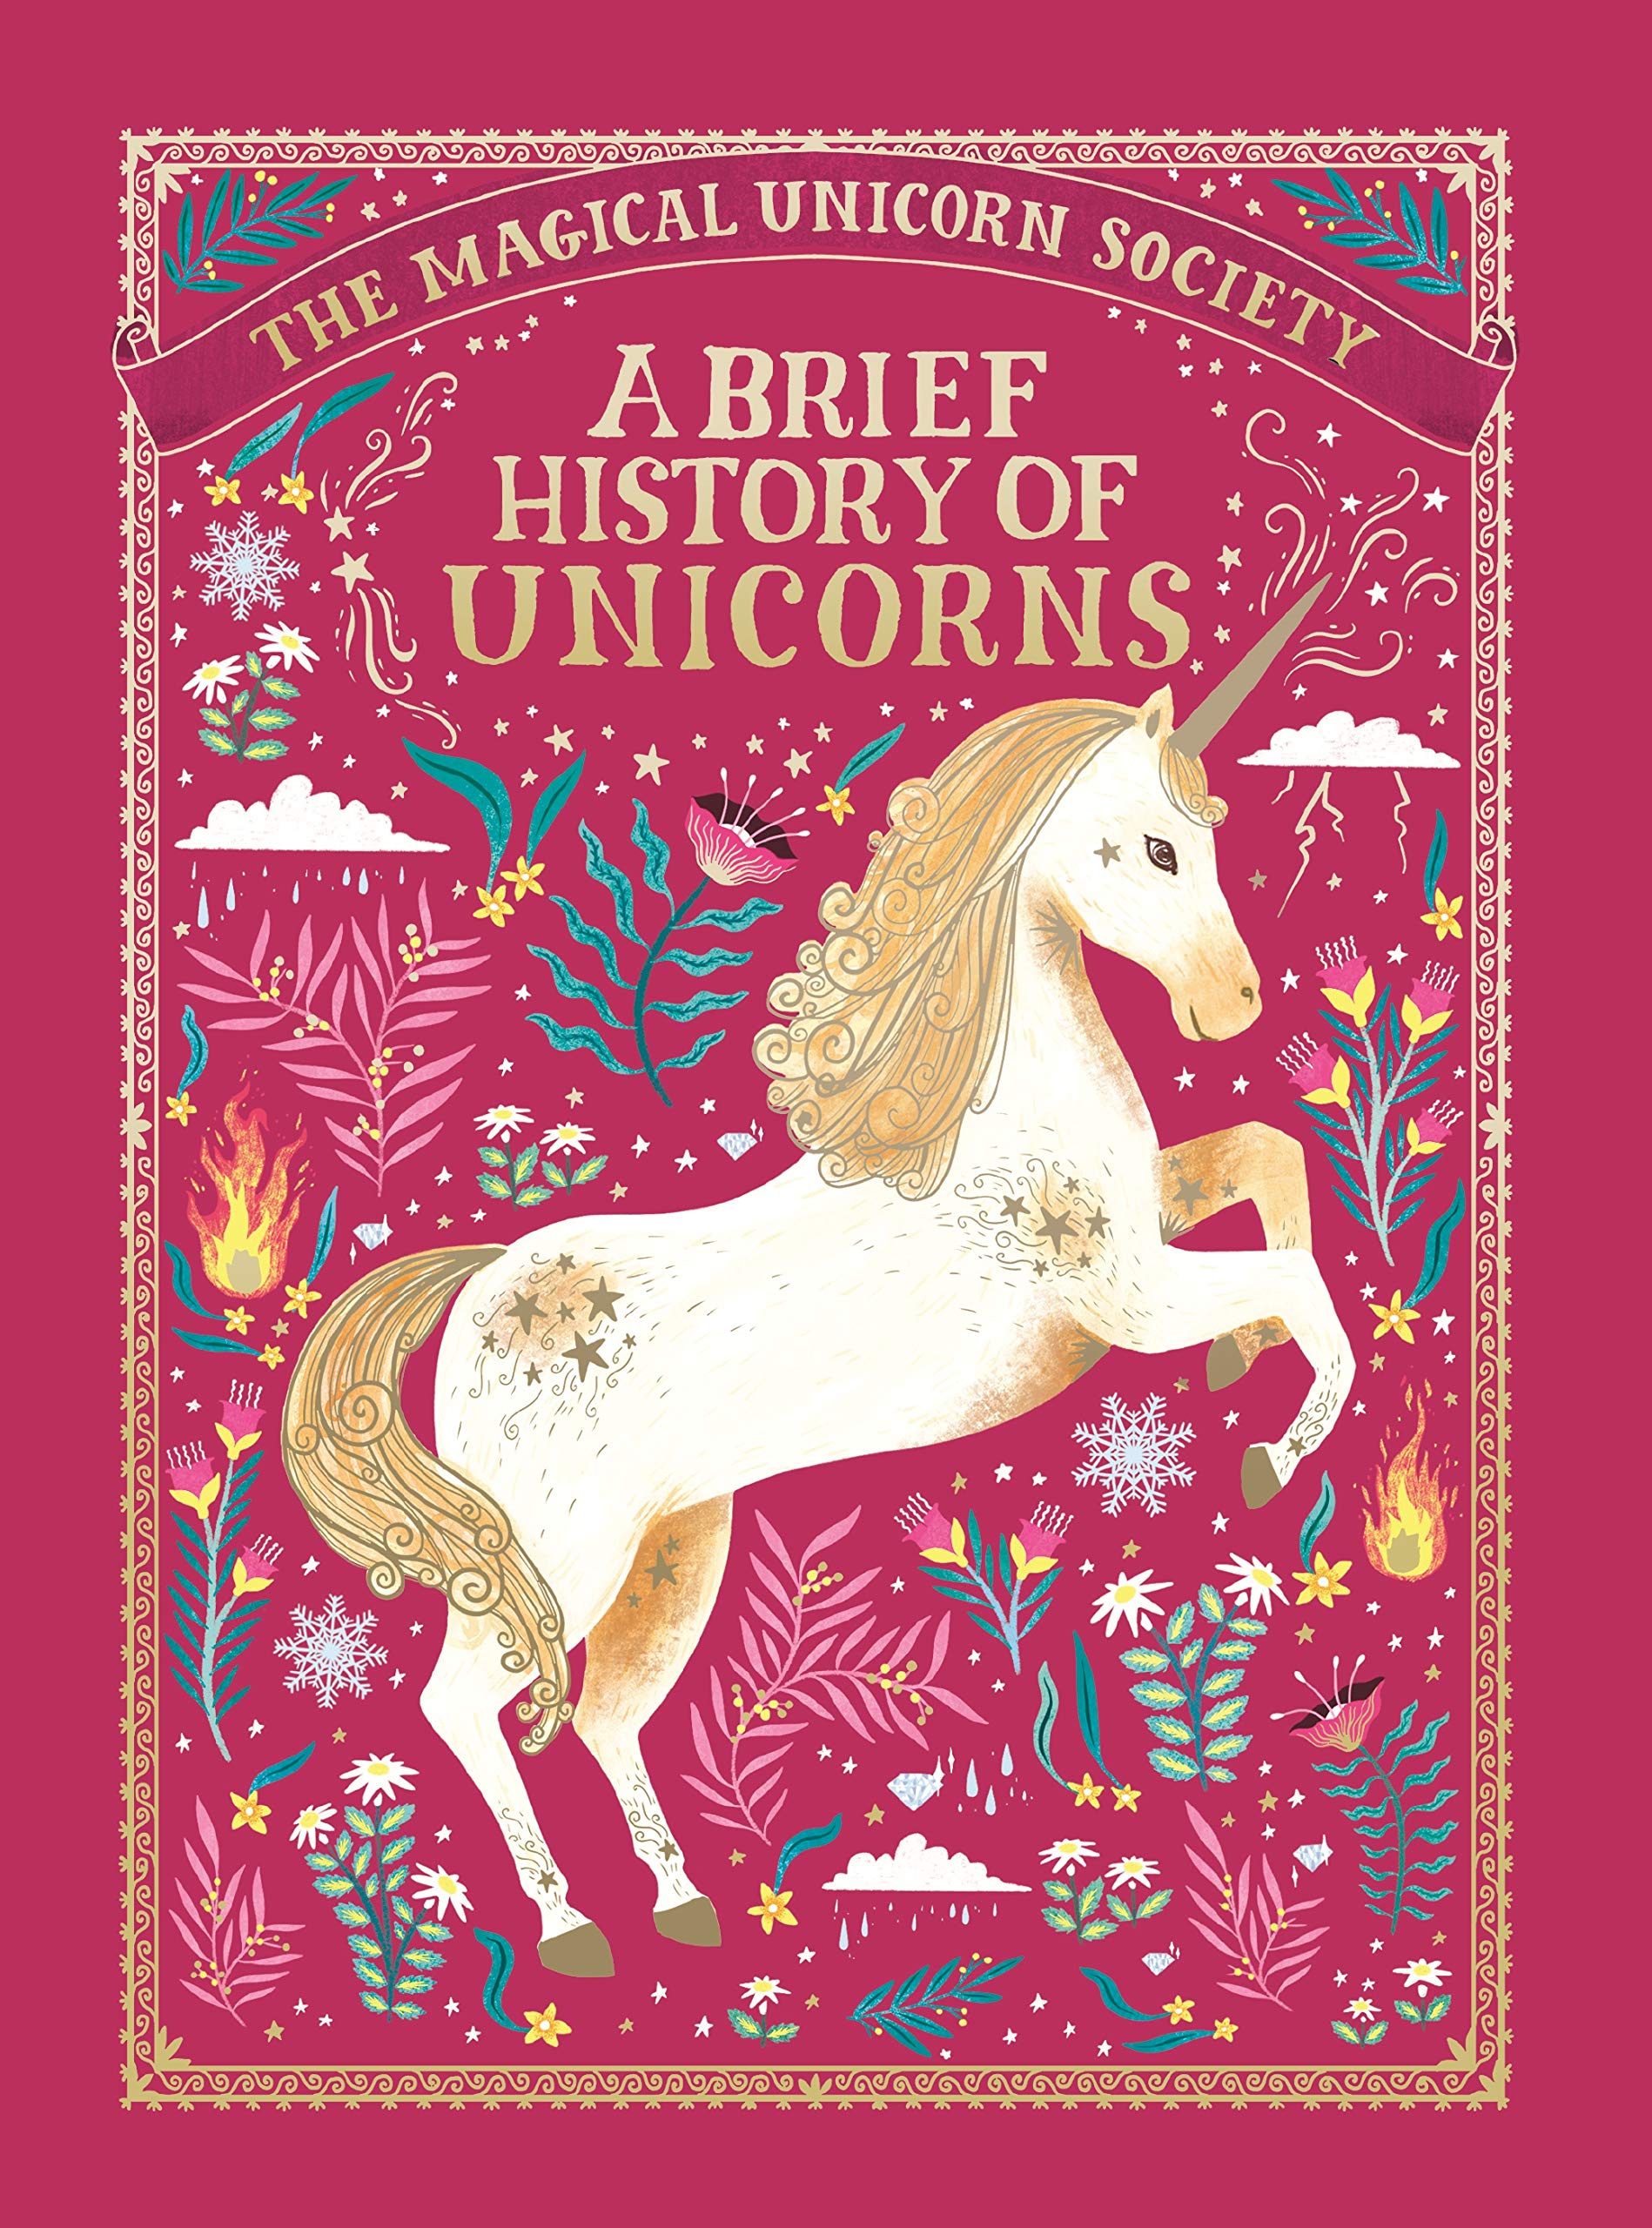 The Magical Unicorn Society: A Brief History of Unicorns (The Magical Unicorn Society, 2) Hardcover